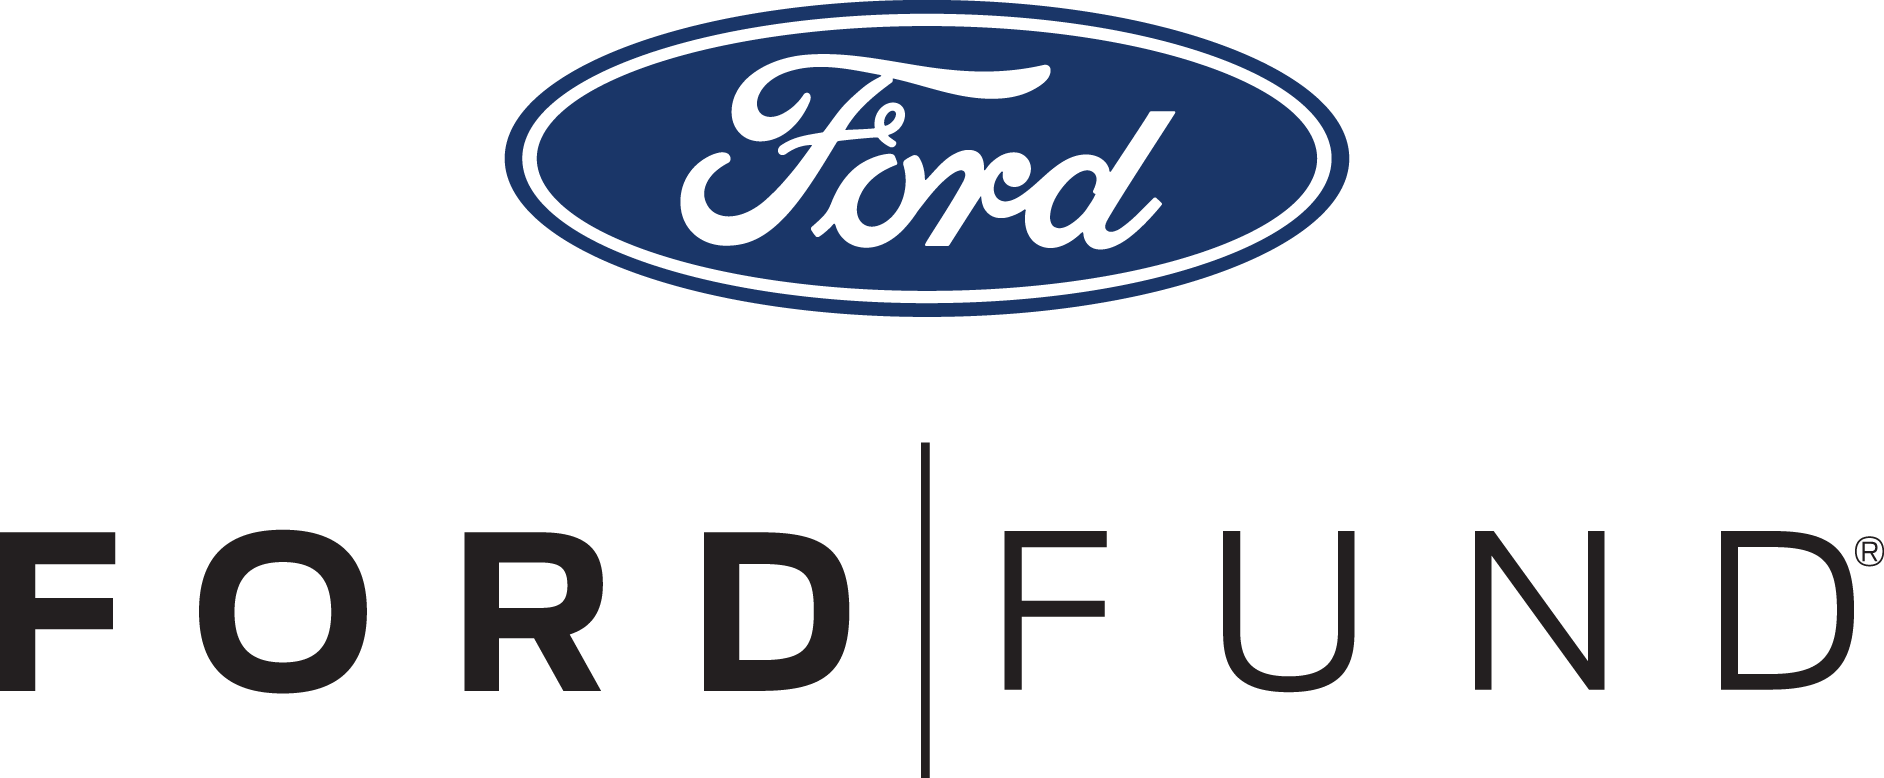 Brand with Blue Oval Logo - Ford Fund | Ford Blue Oval Network